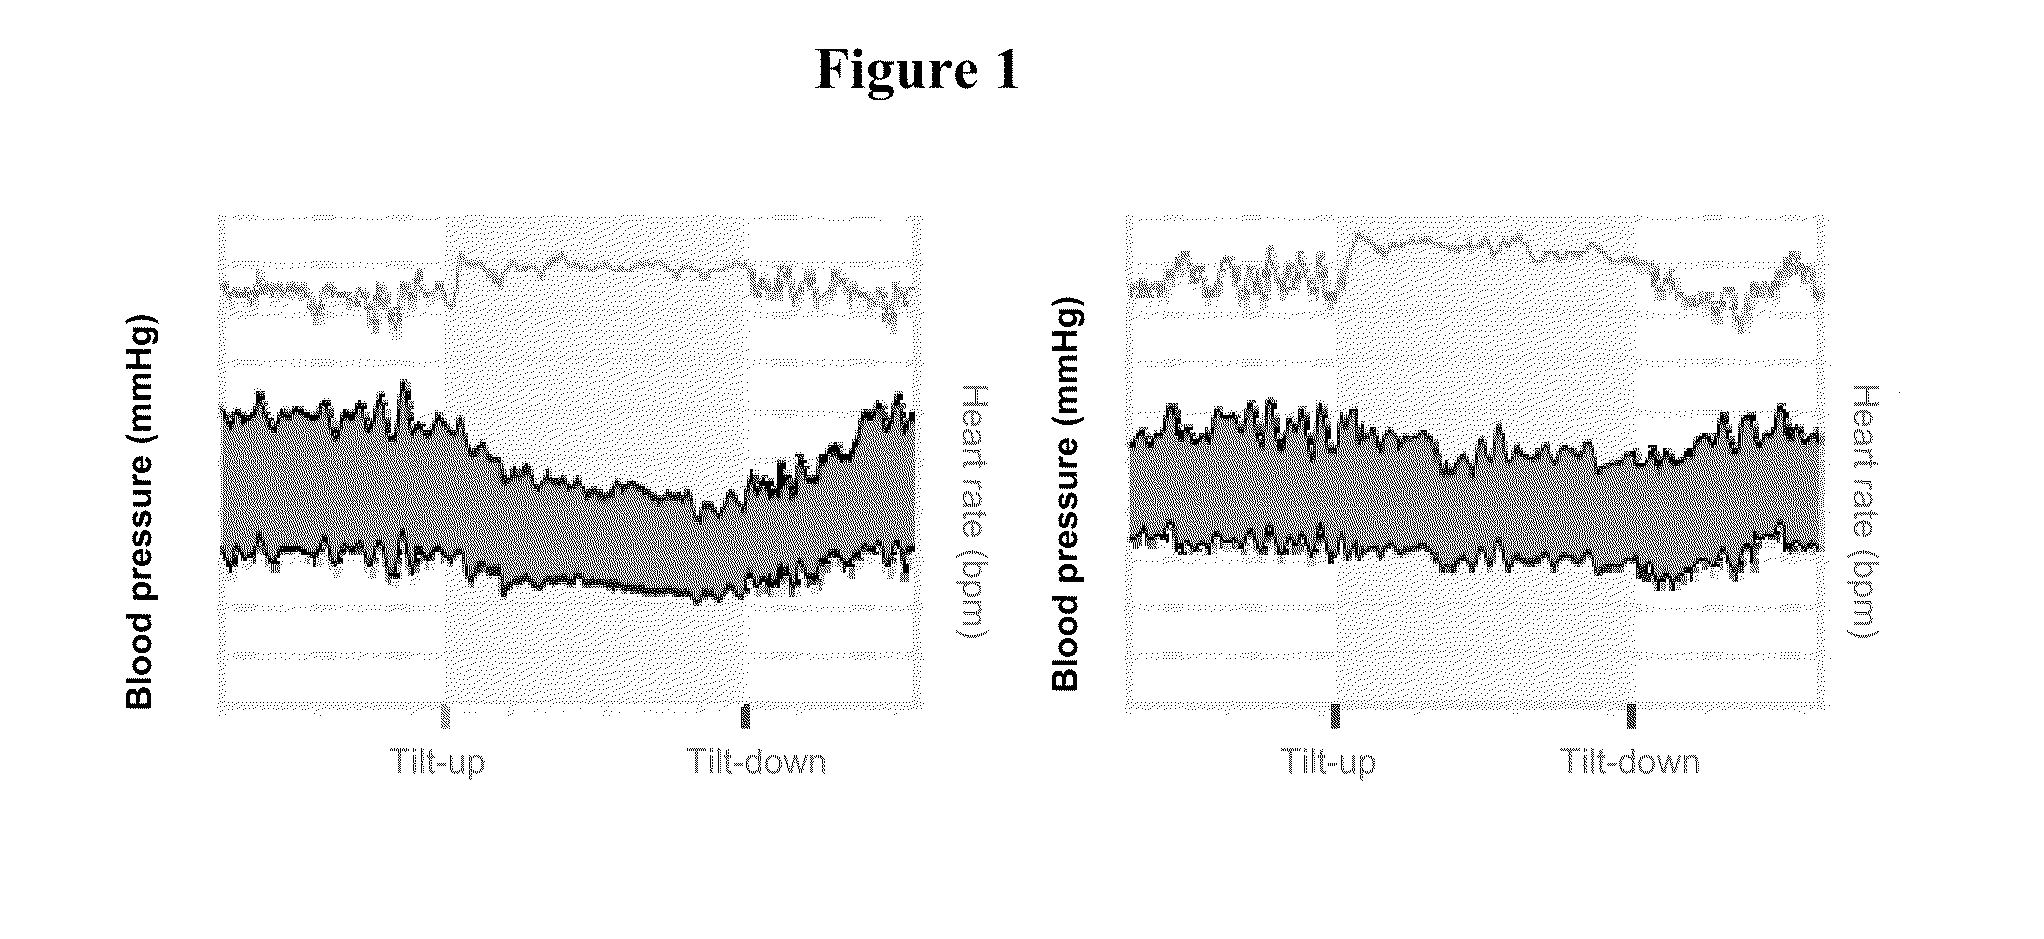 Methods and materials for treating orthostatic hypotension or postural tachycardia syndrome